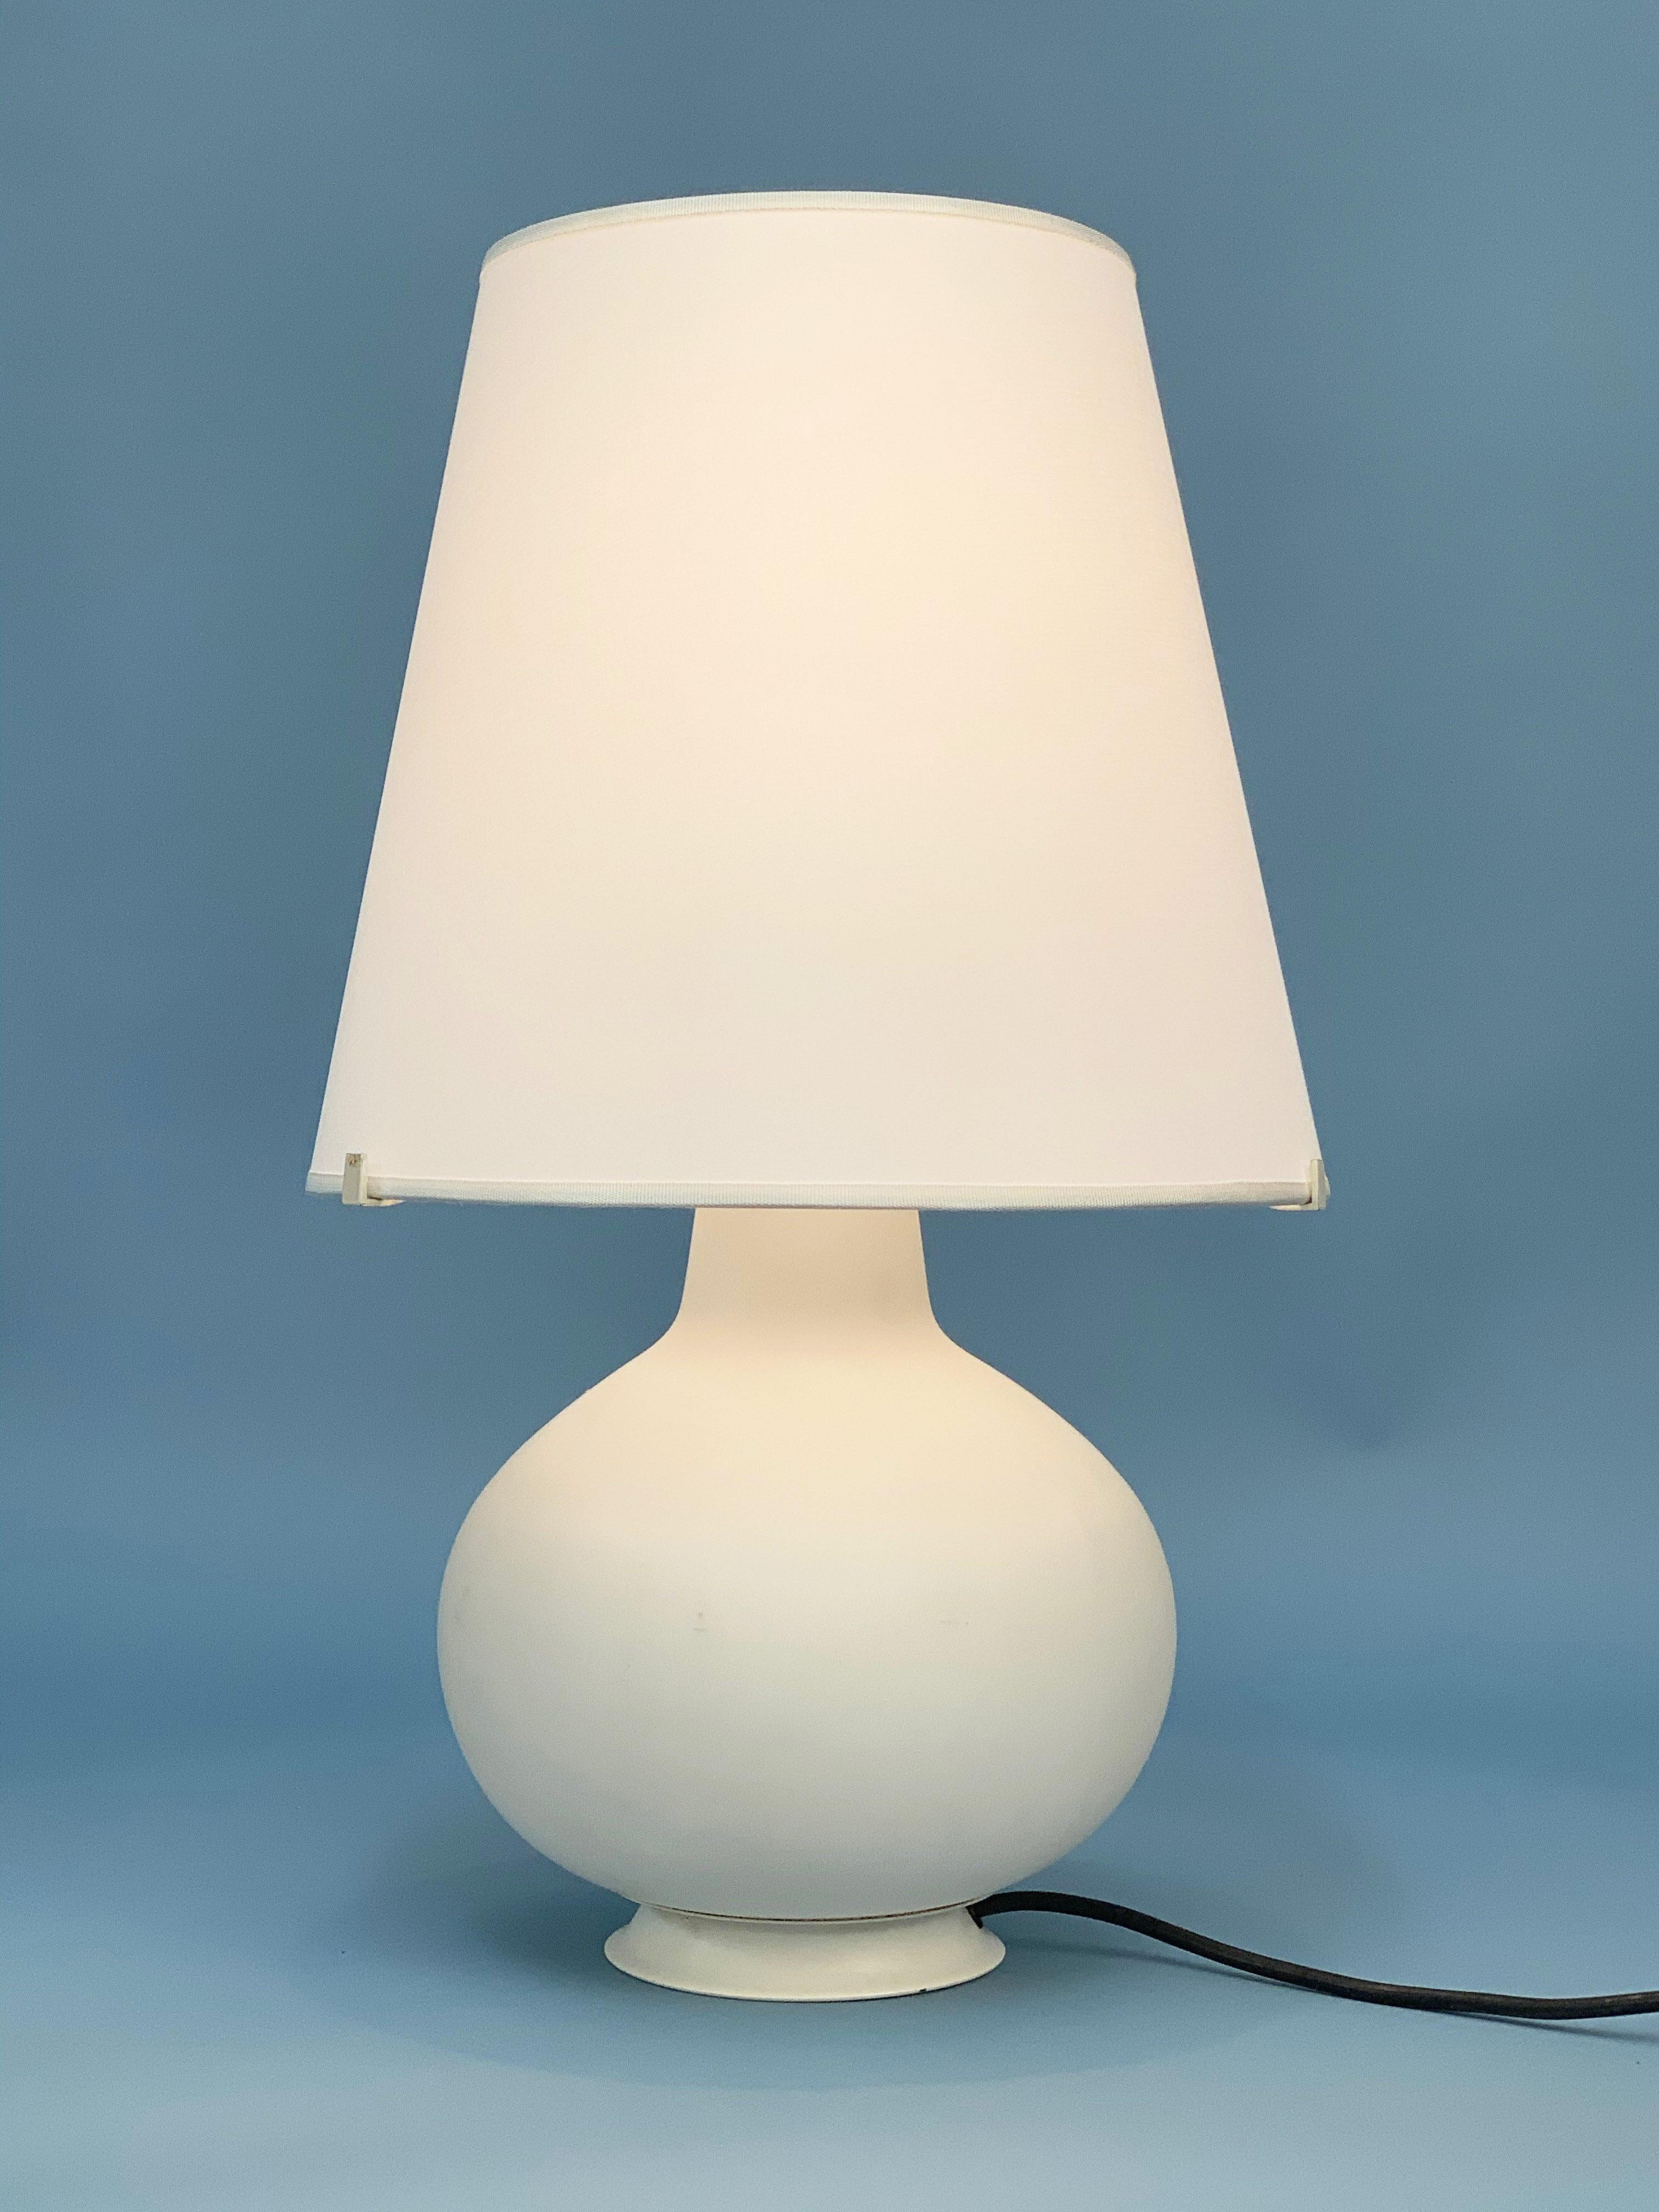 Lacquered Max Ingrand Midcentury White Opaline Glass Table Lamp for Fontana Arte, 1954